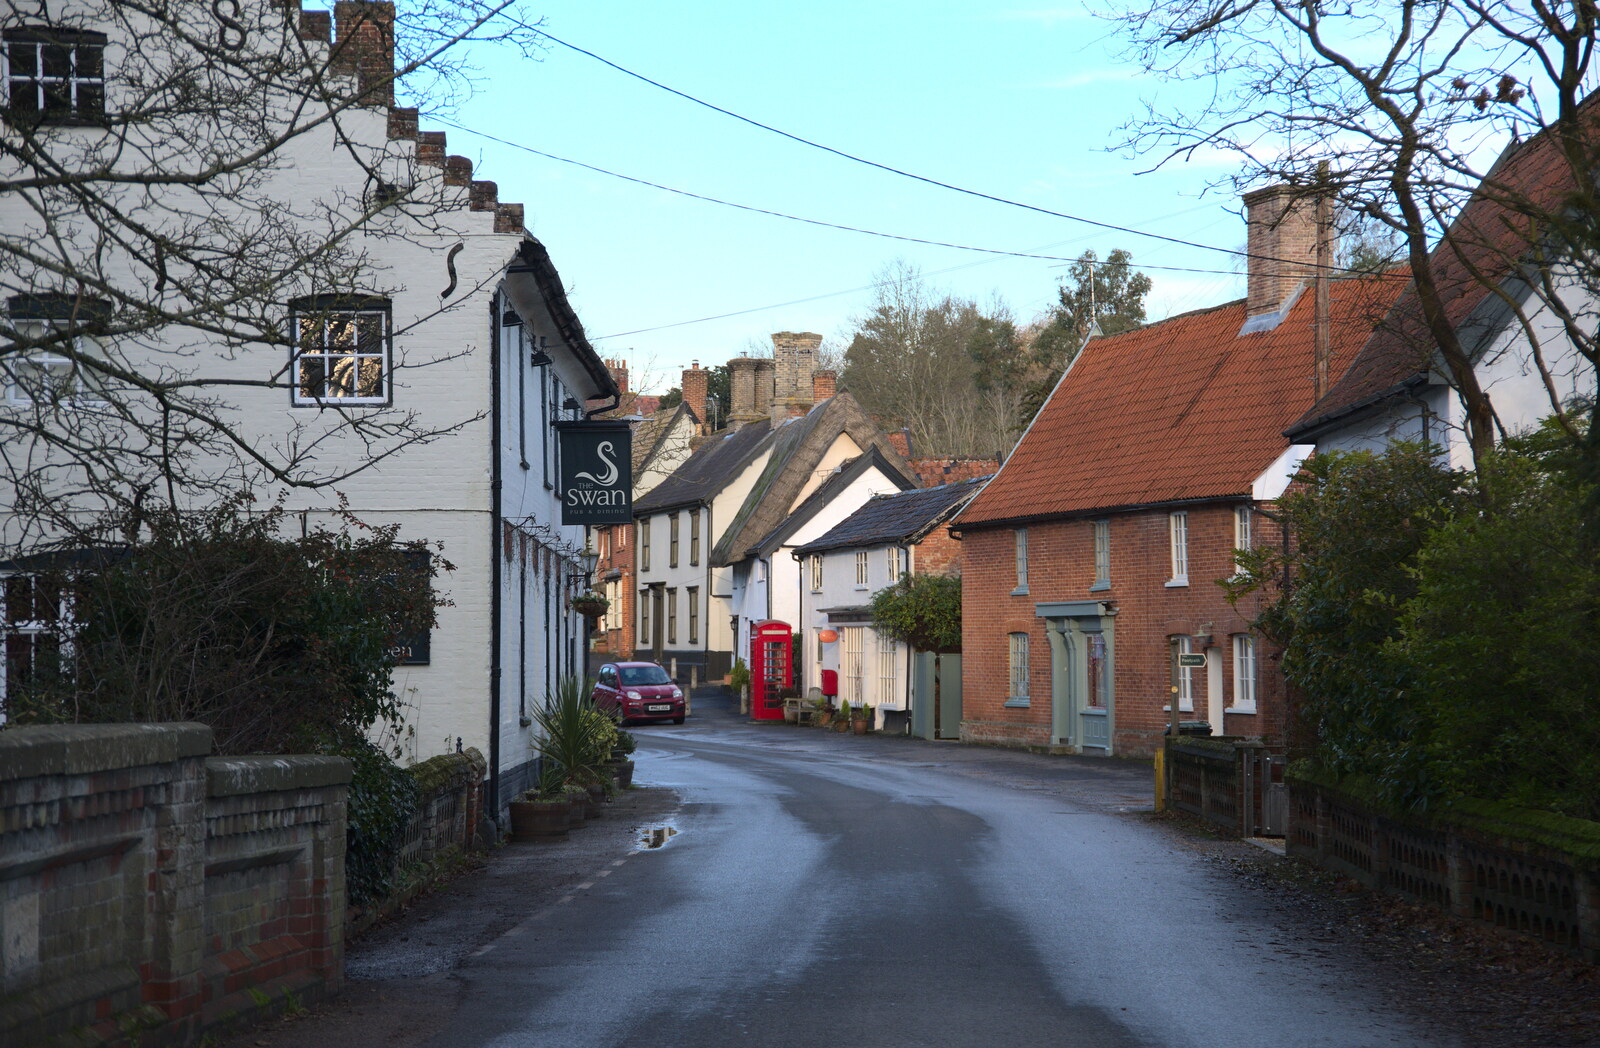 Winter Walks around Brome and Hoxne, Suffolk - 2nd January 2023: Hoxne and The Swan pub